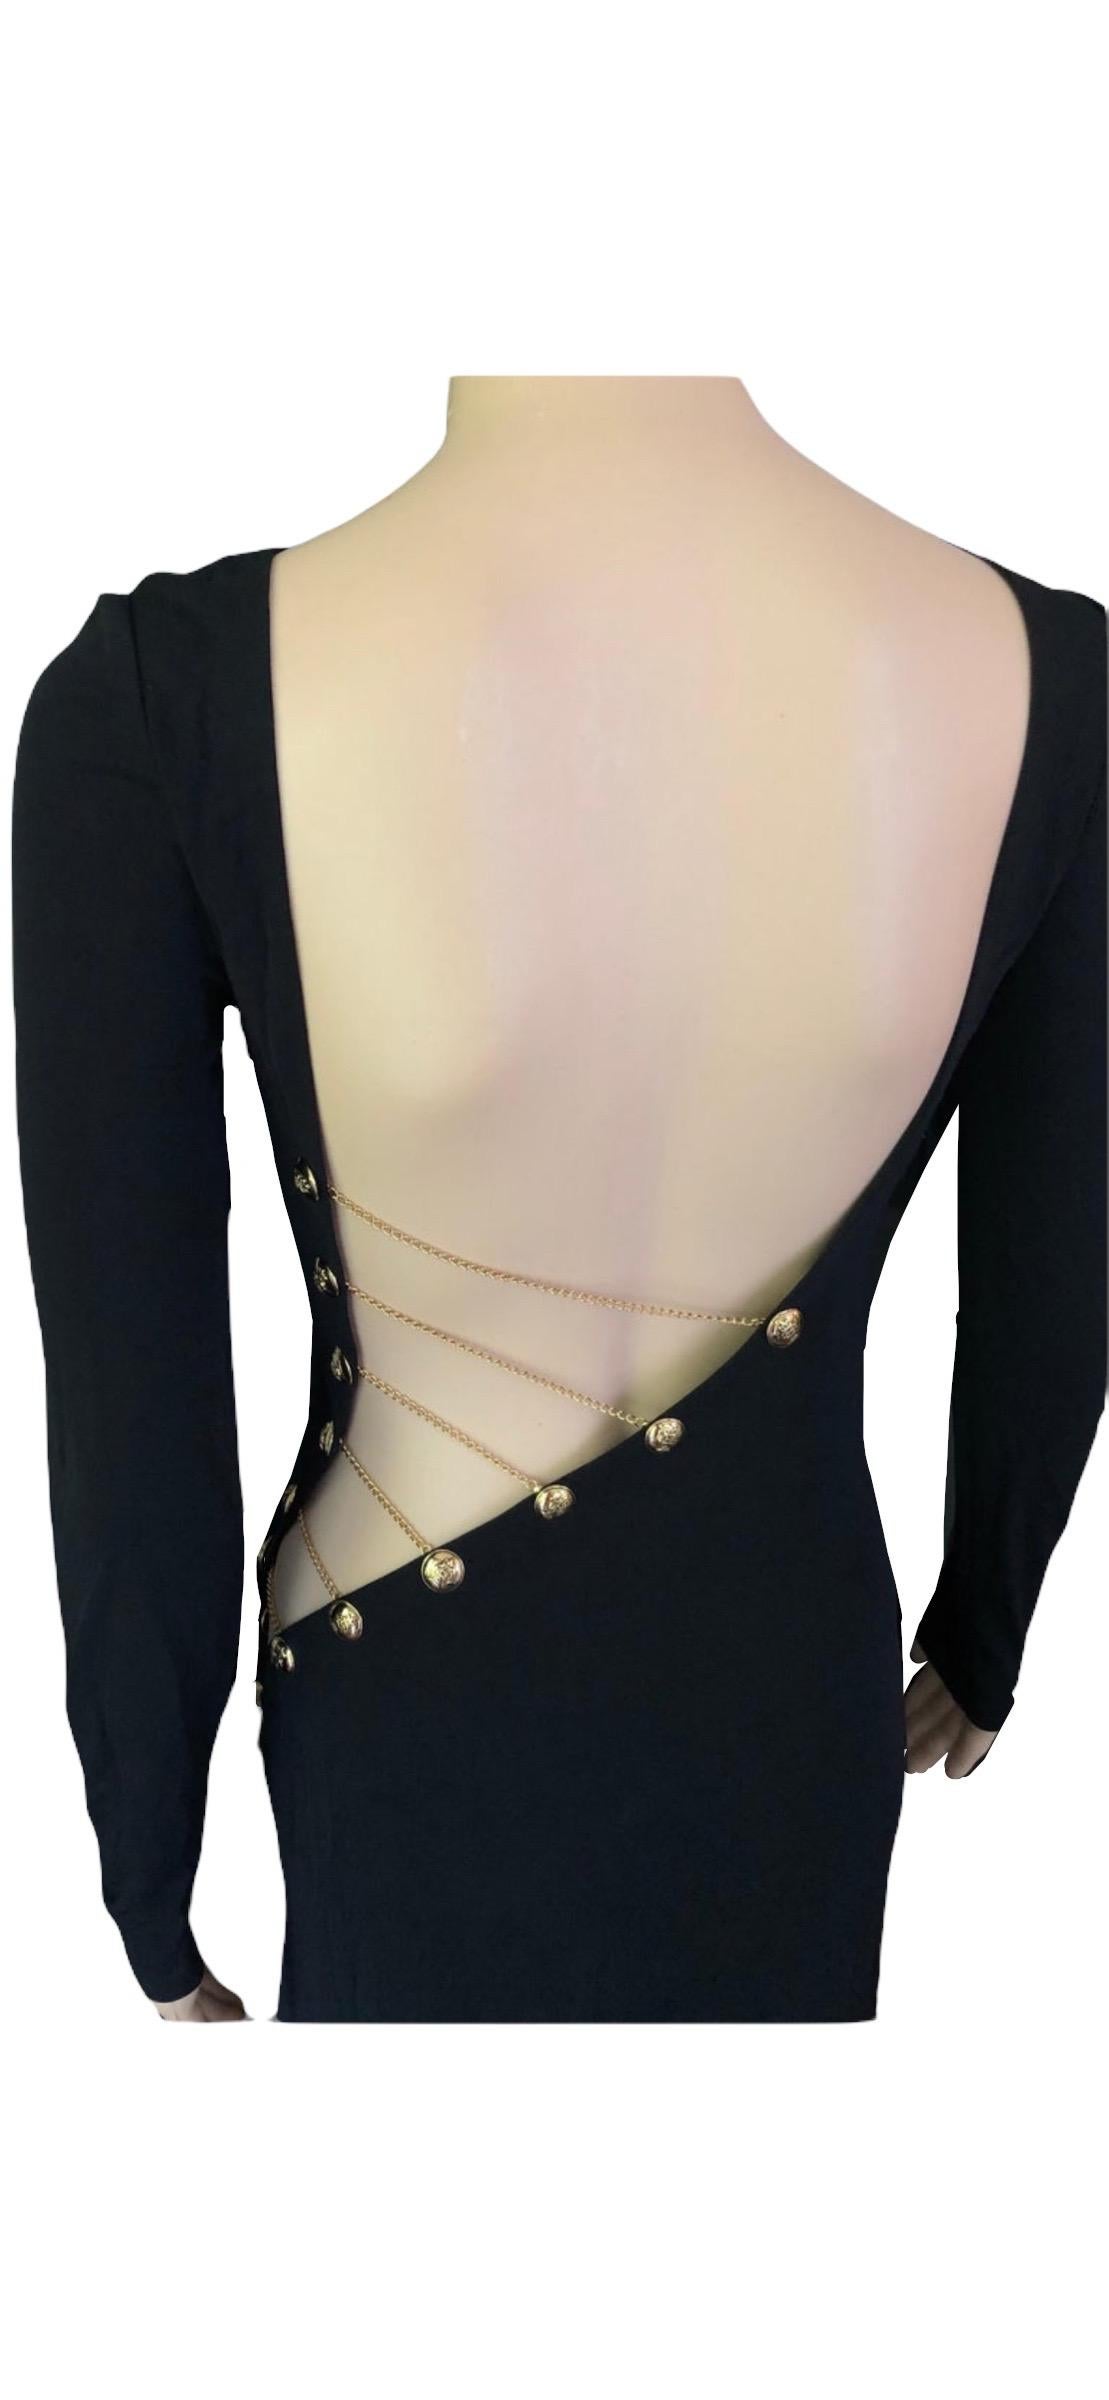 Emilio Pucci Chain Embellished Cutout Open Back Black Evening Dress Gown For Sale 6